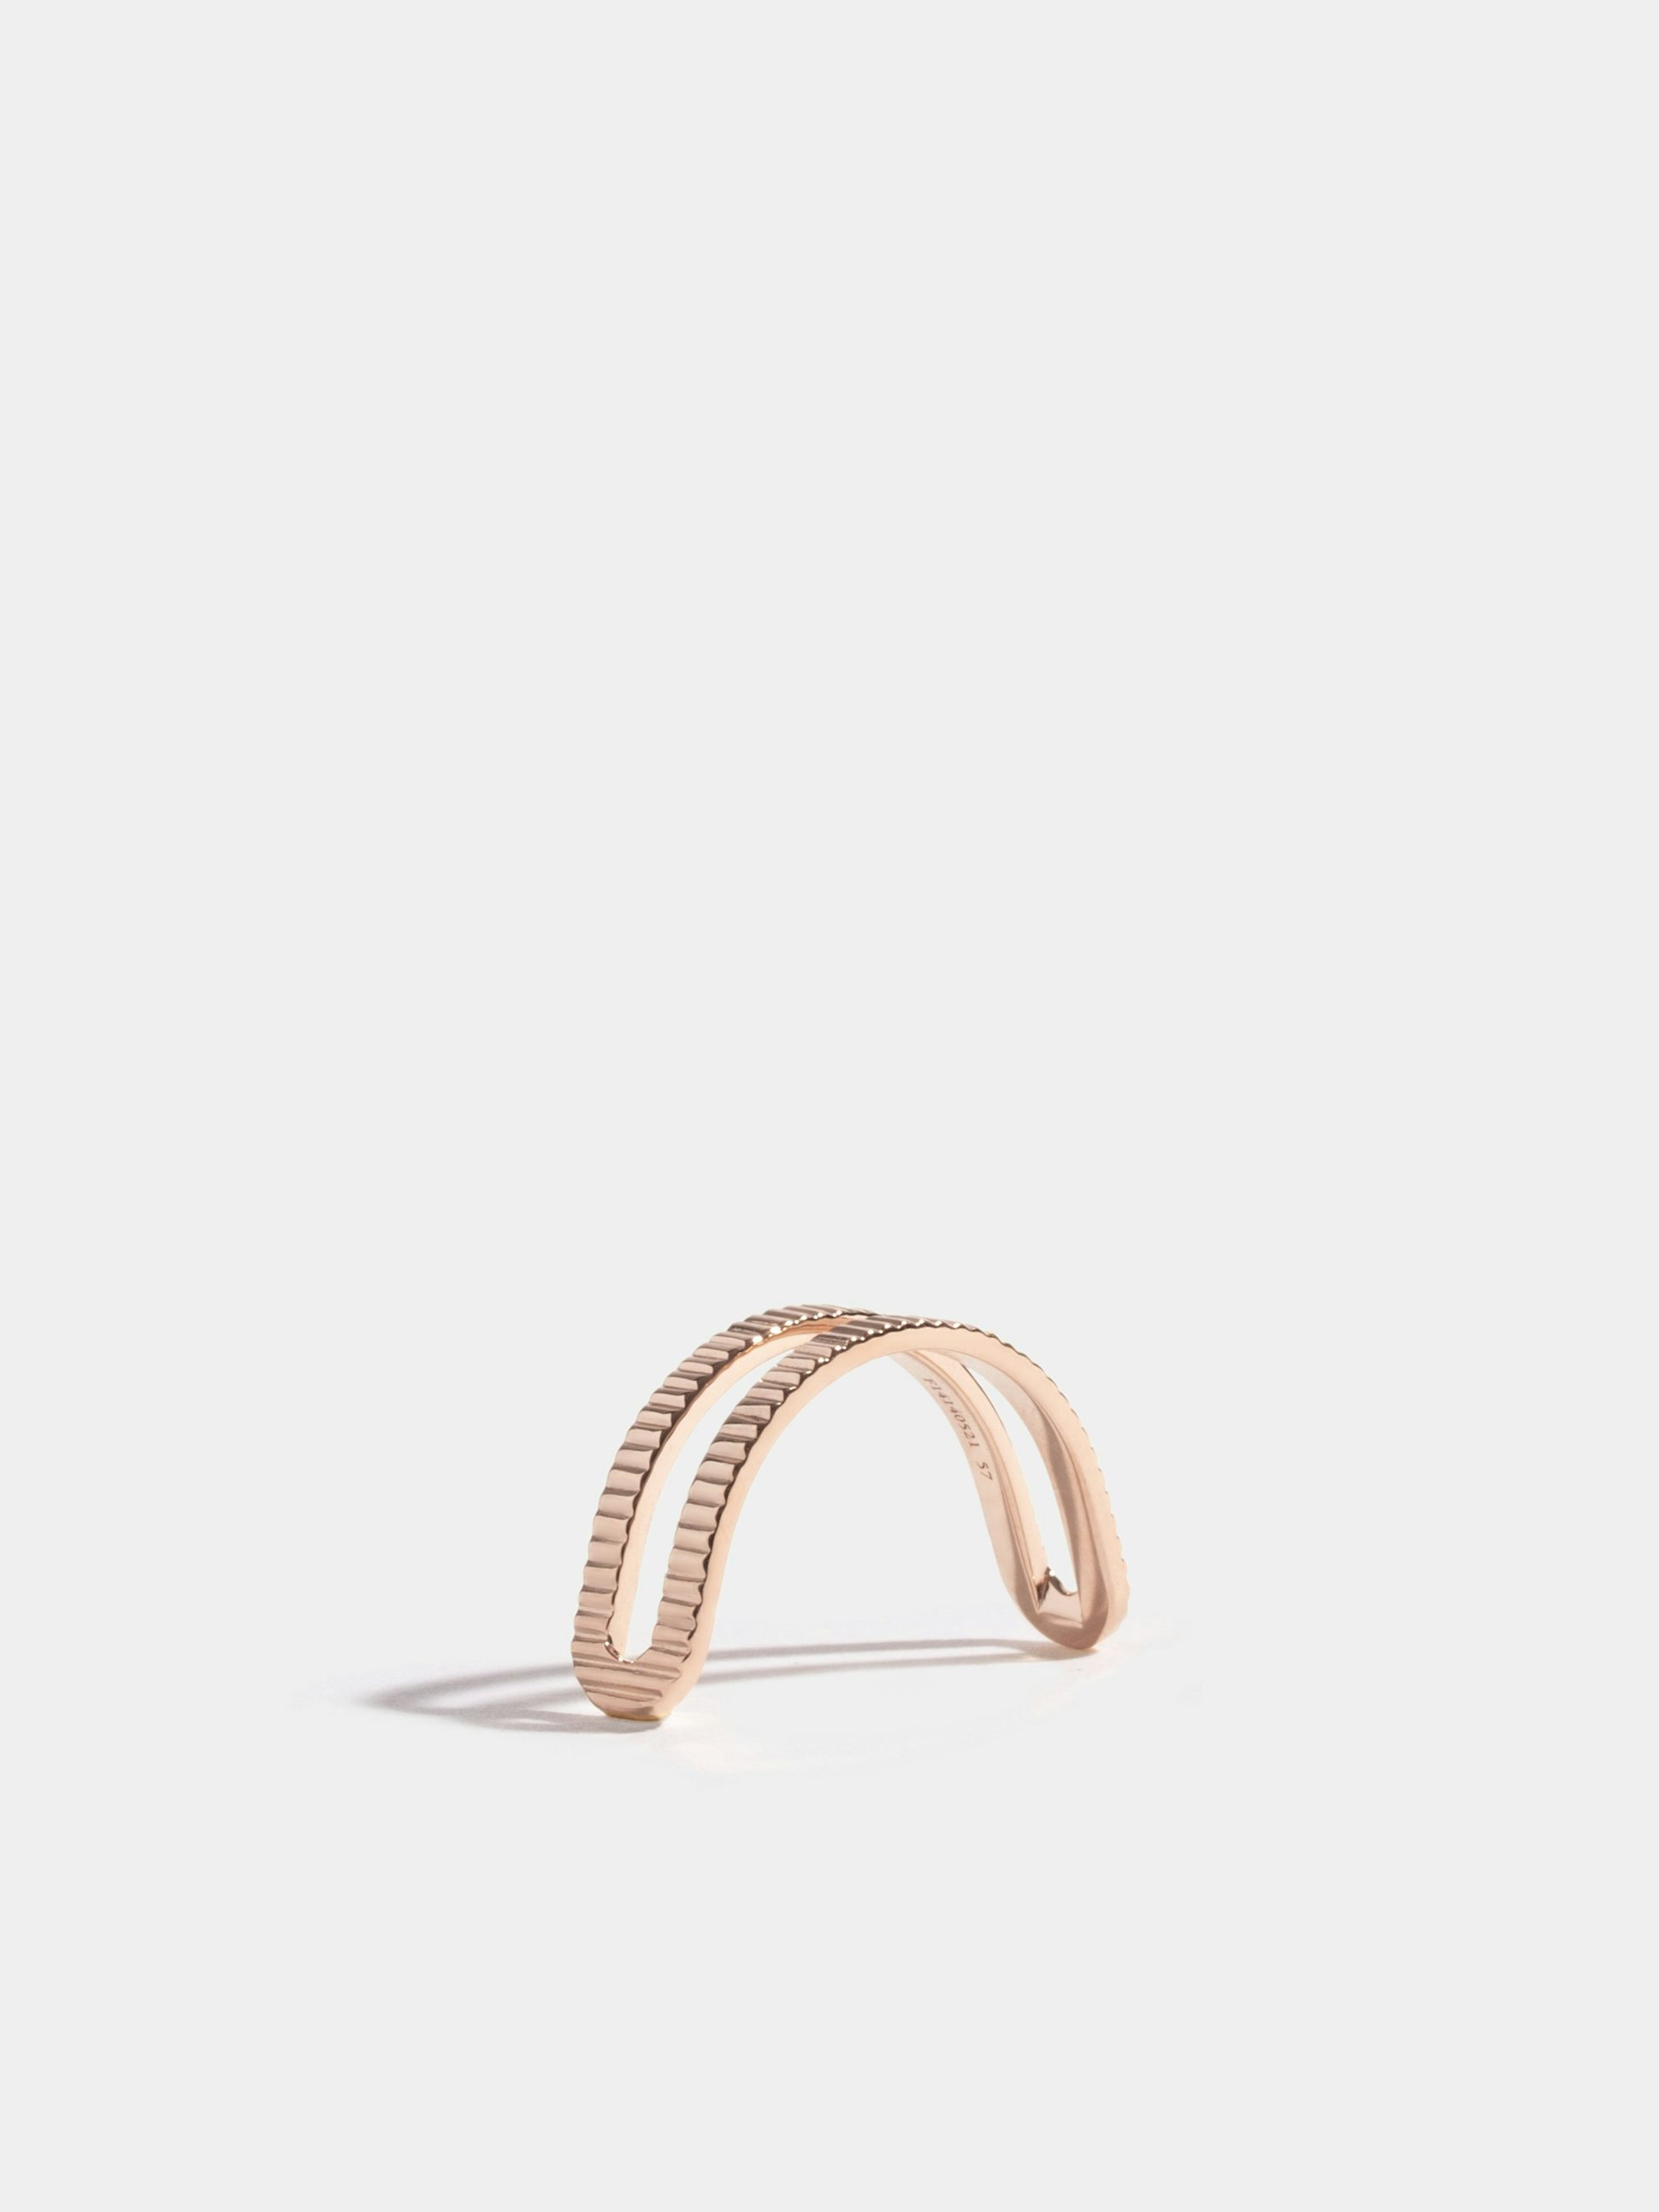 Étreintes simple half-ring in 18k Fairmined ethical rose gold, with ridges finish.